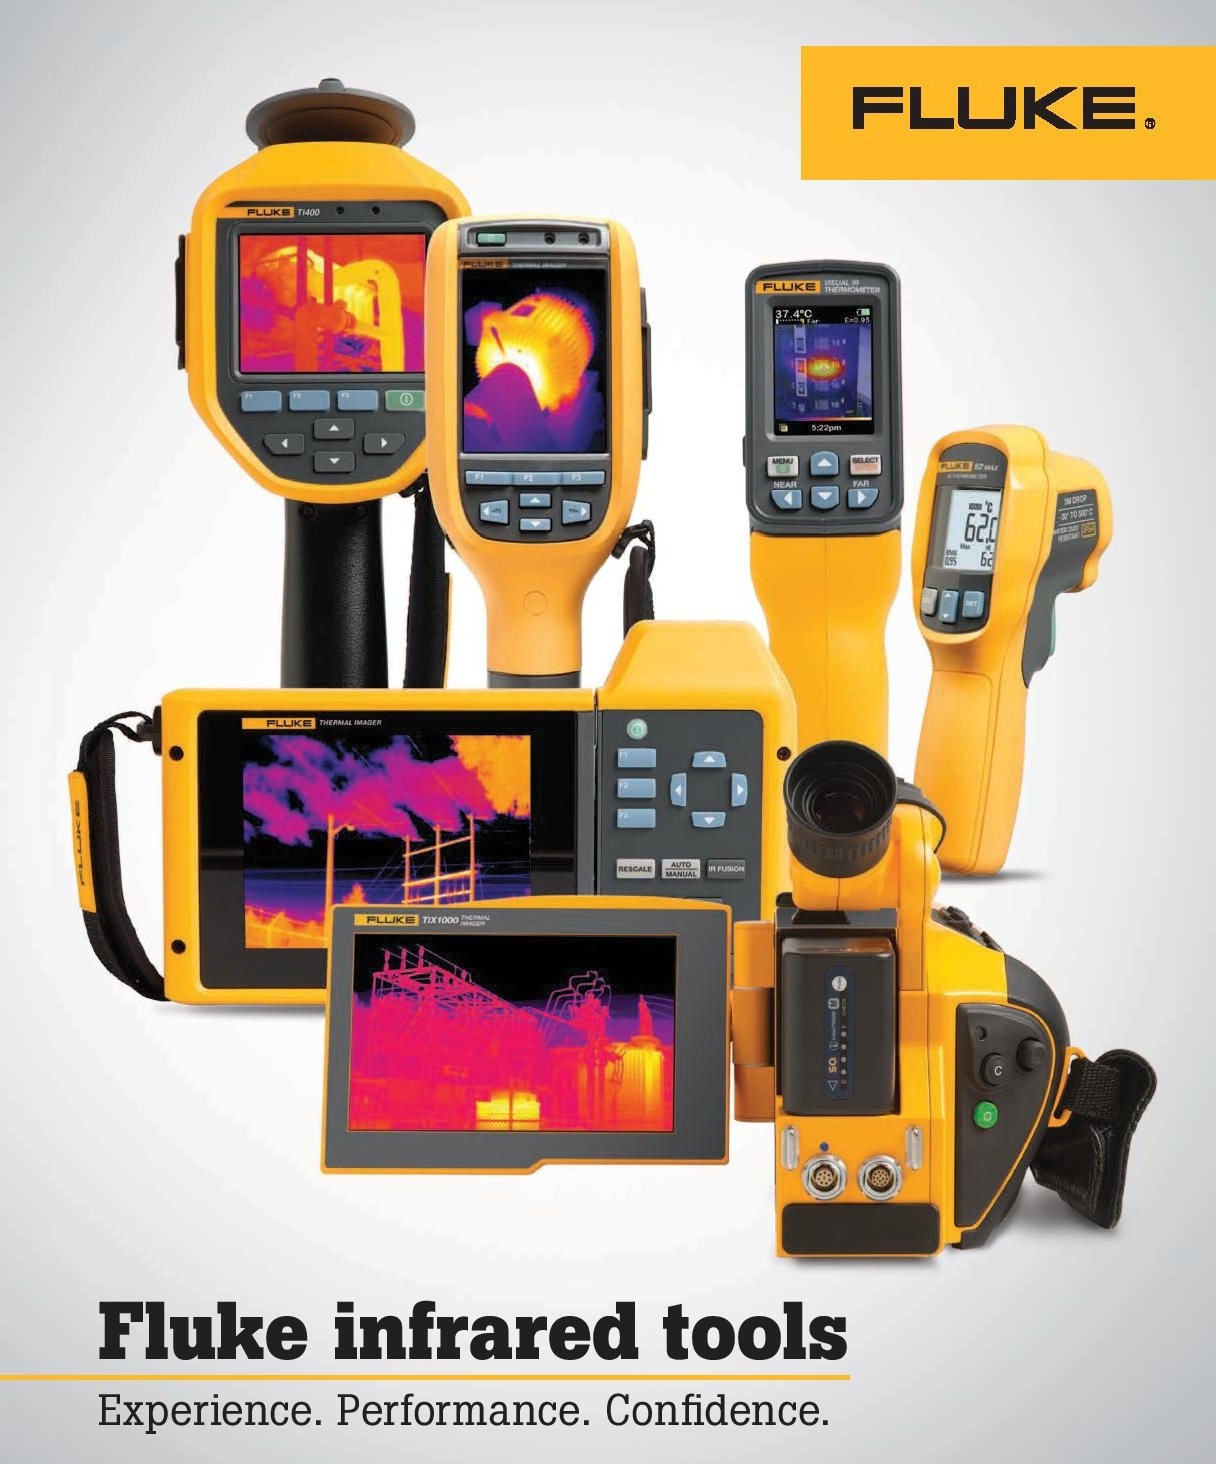 Preventive Maintenance using thermal imager